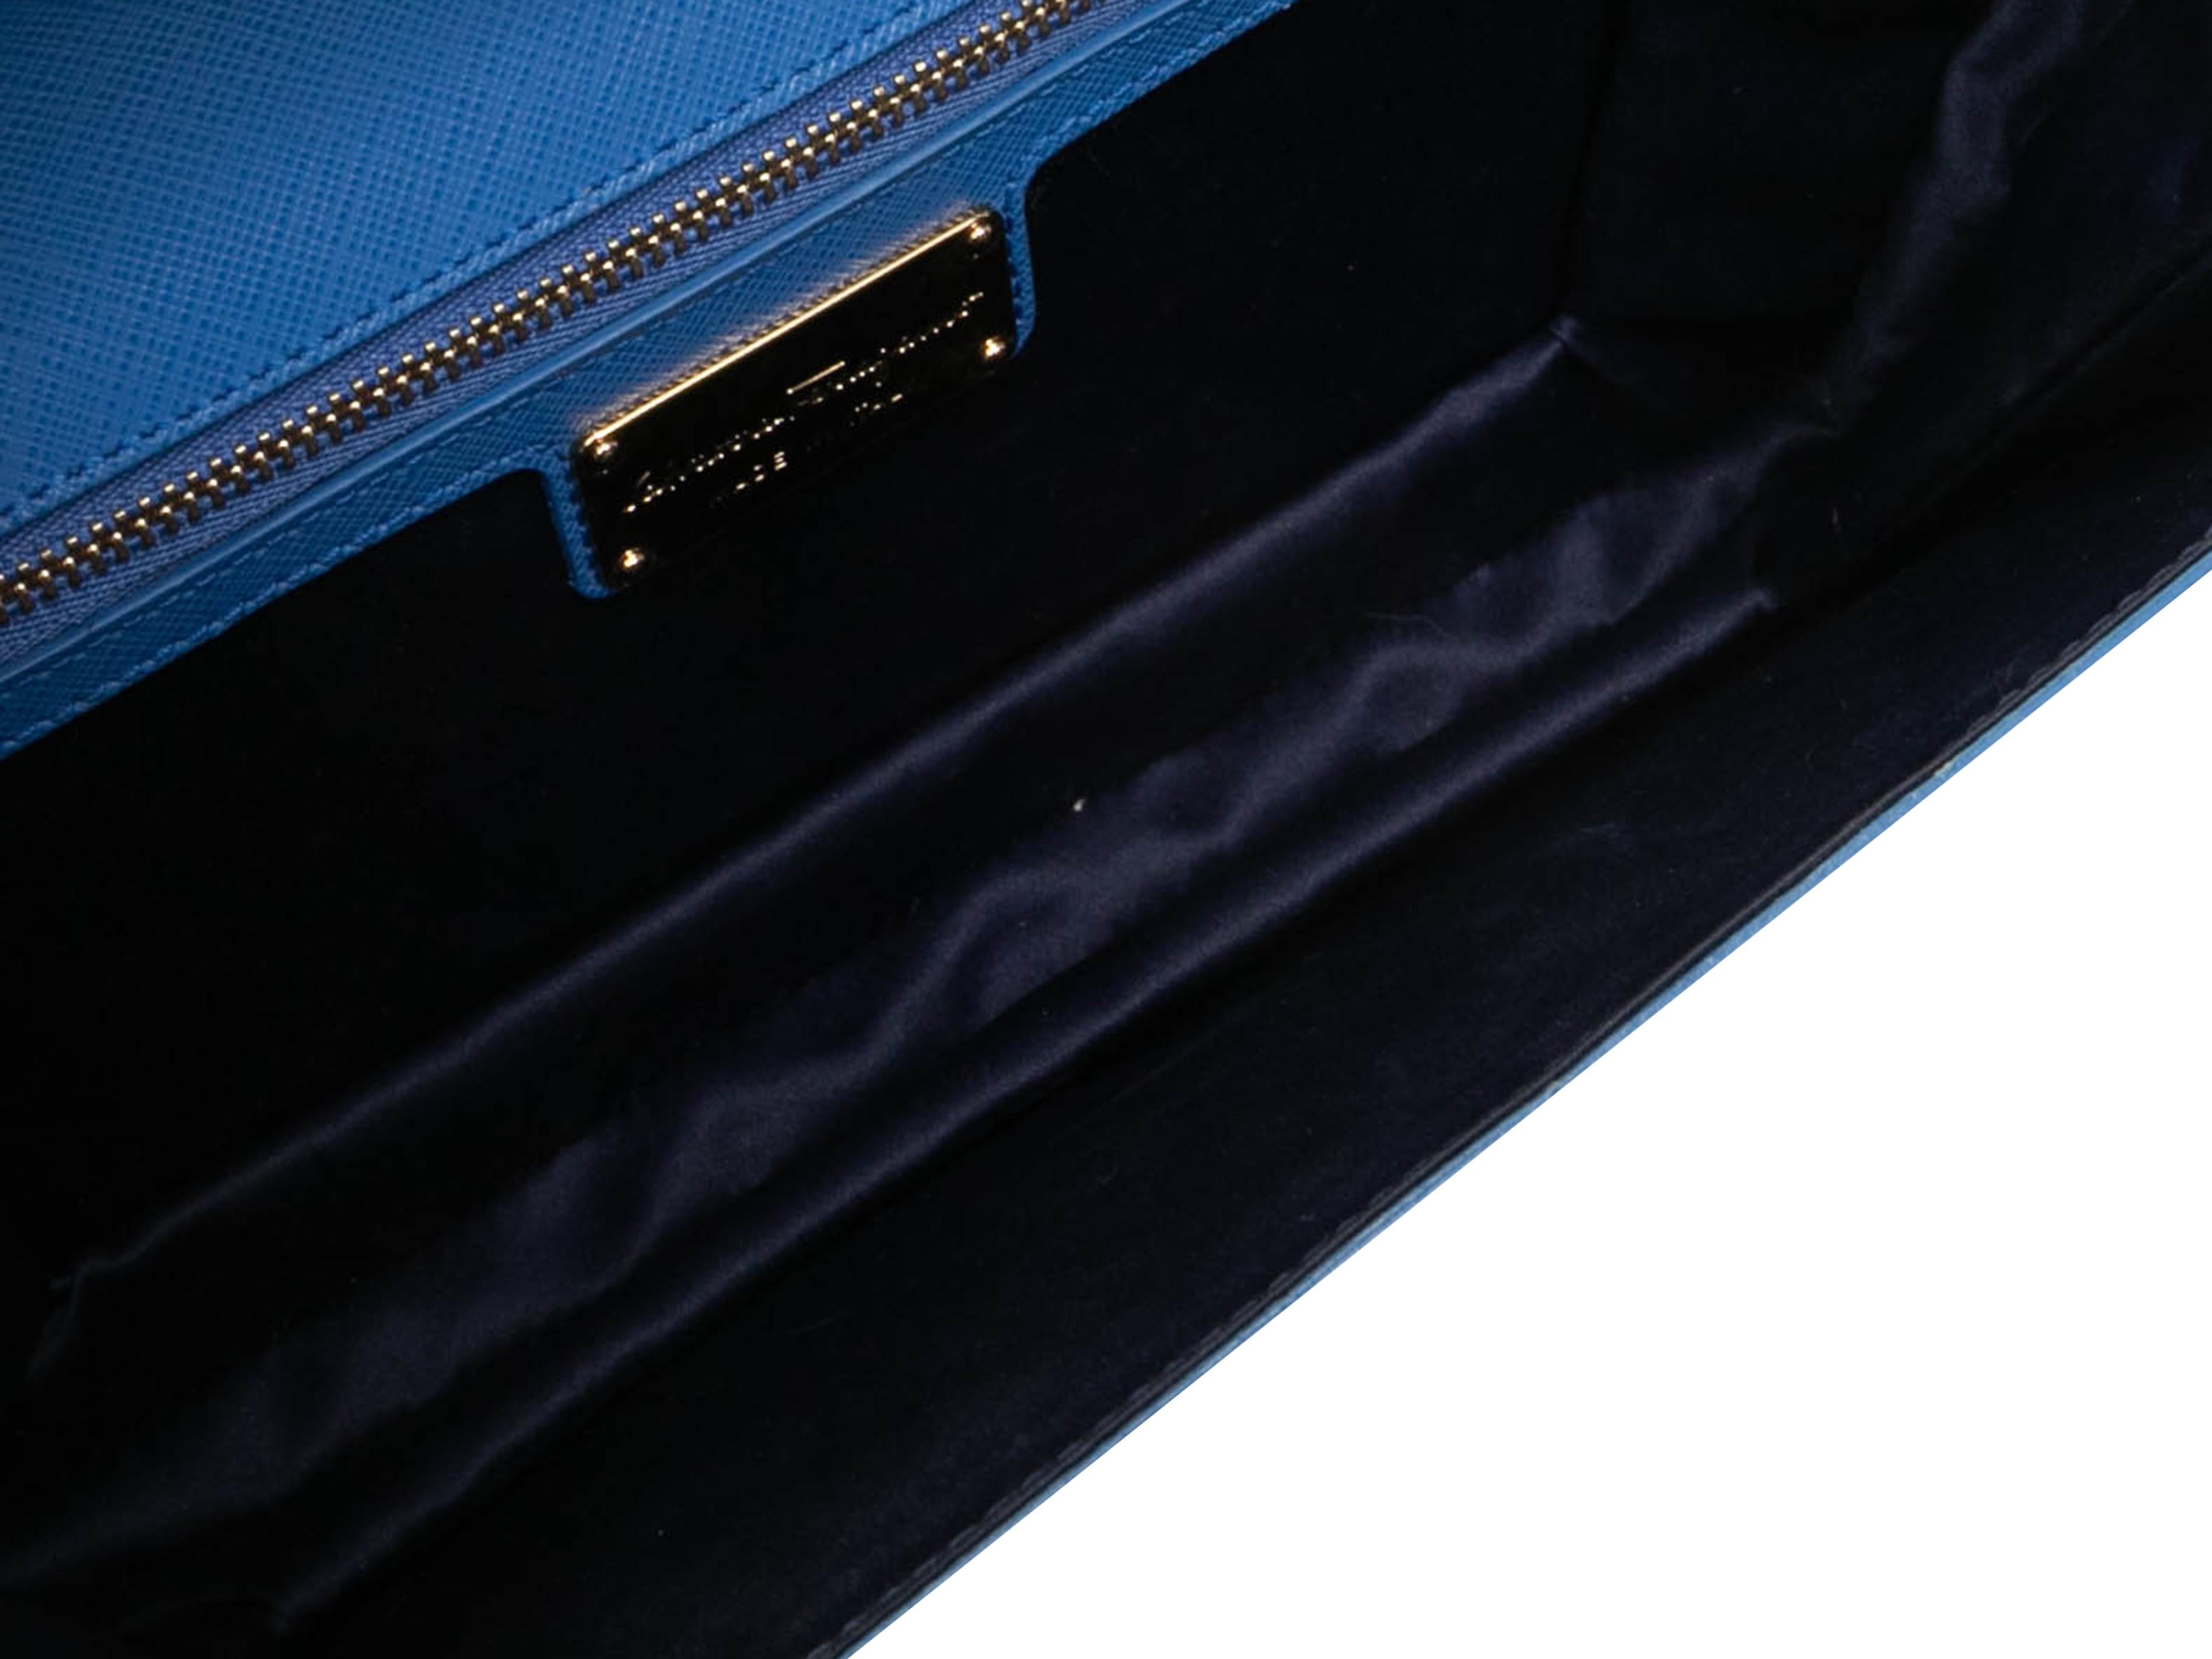 Blue Salvatore Ferragamo Vara Bow Bag In Good Condition For Sale In New York, NY